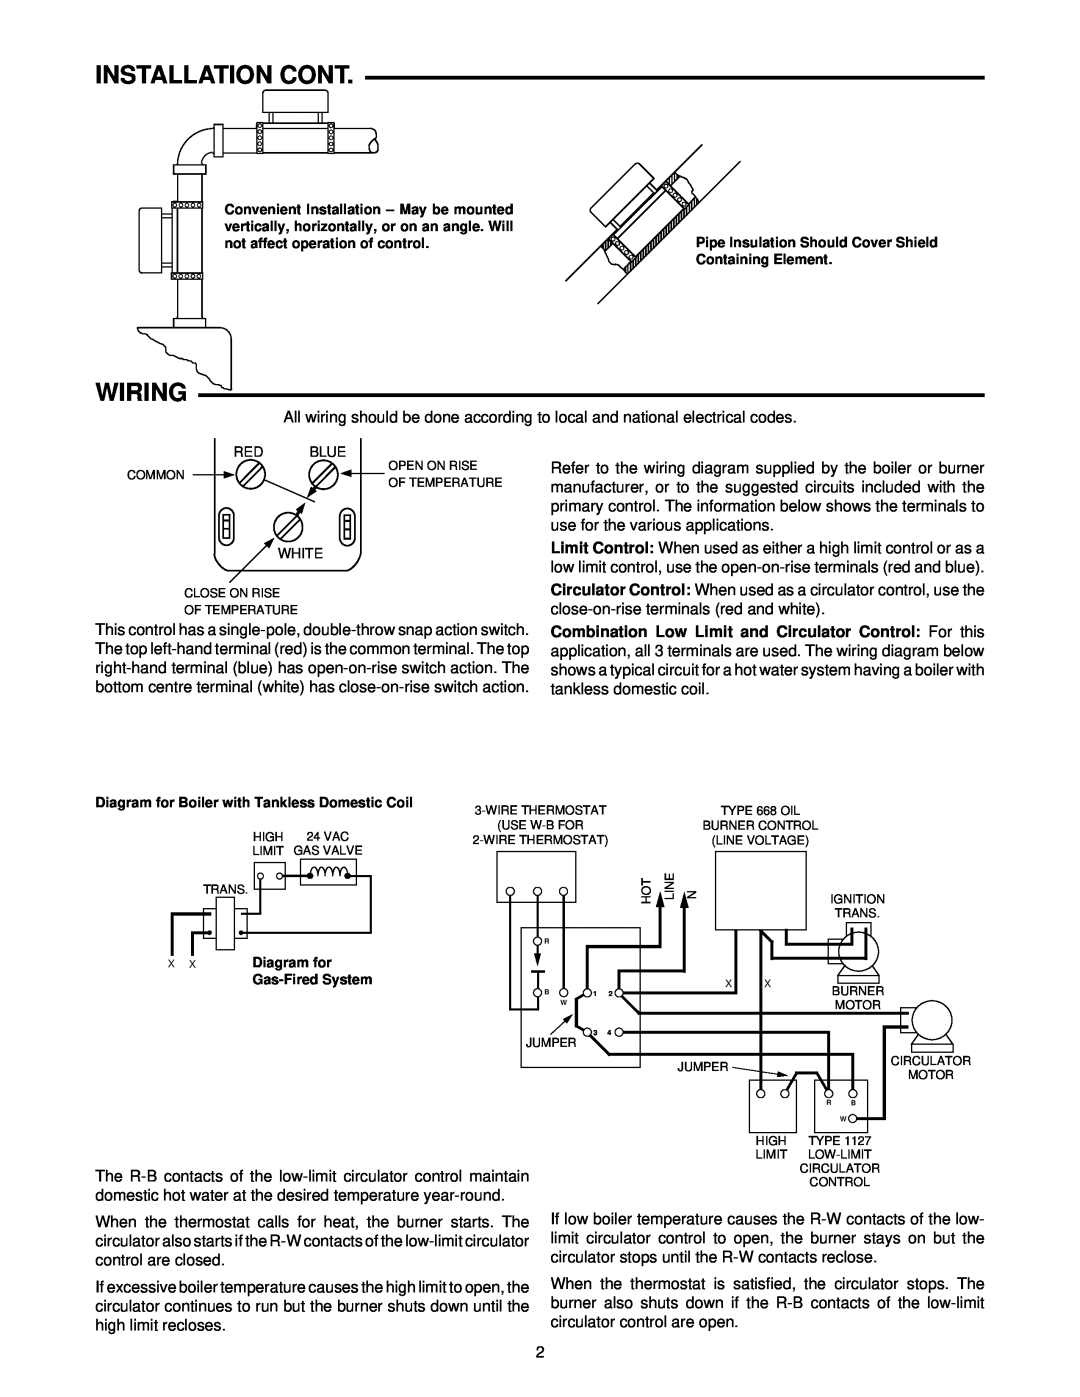 White Rodgers 1127 installation instructions Installation Cont, Wiring 